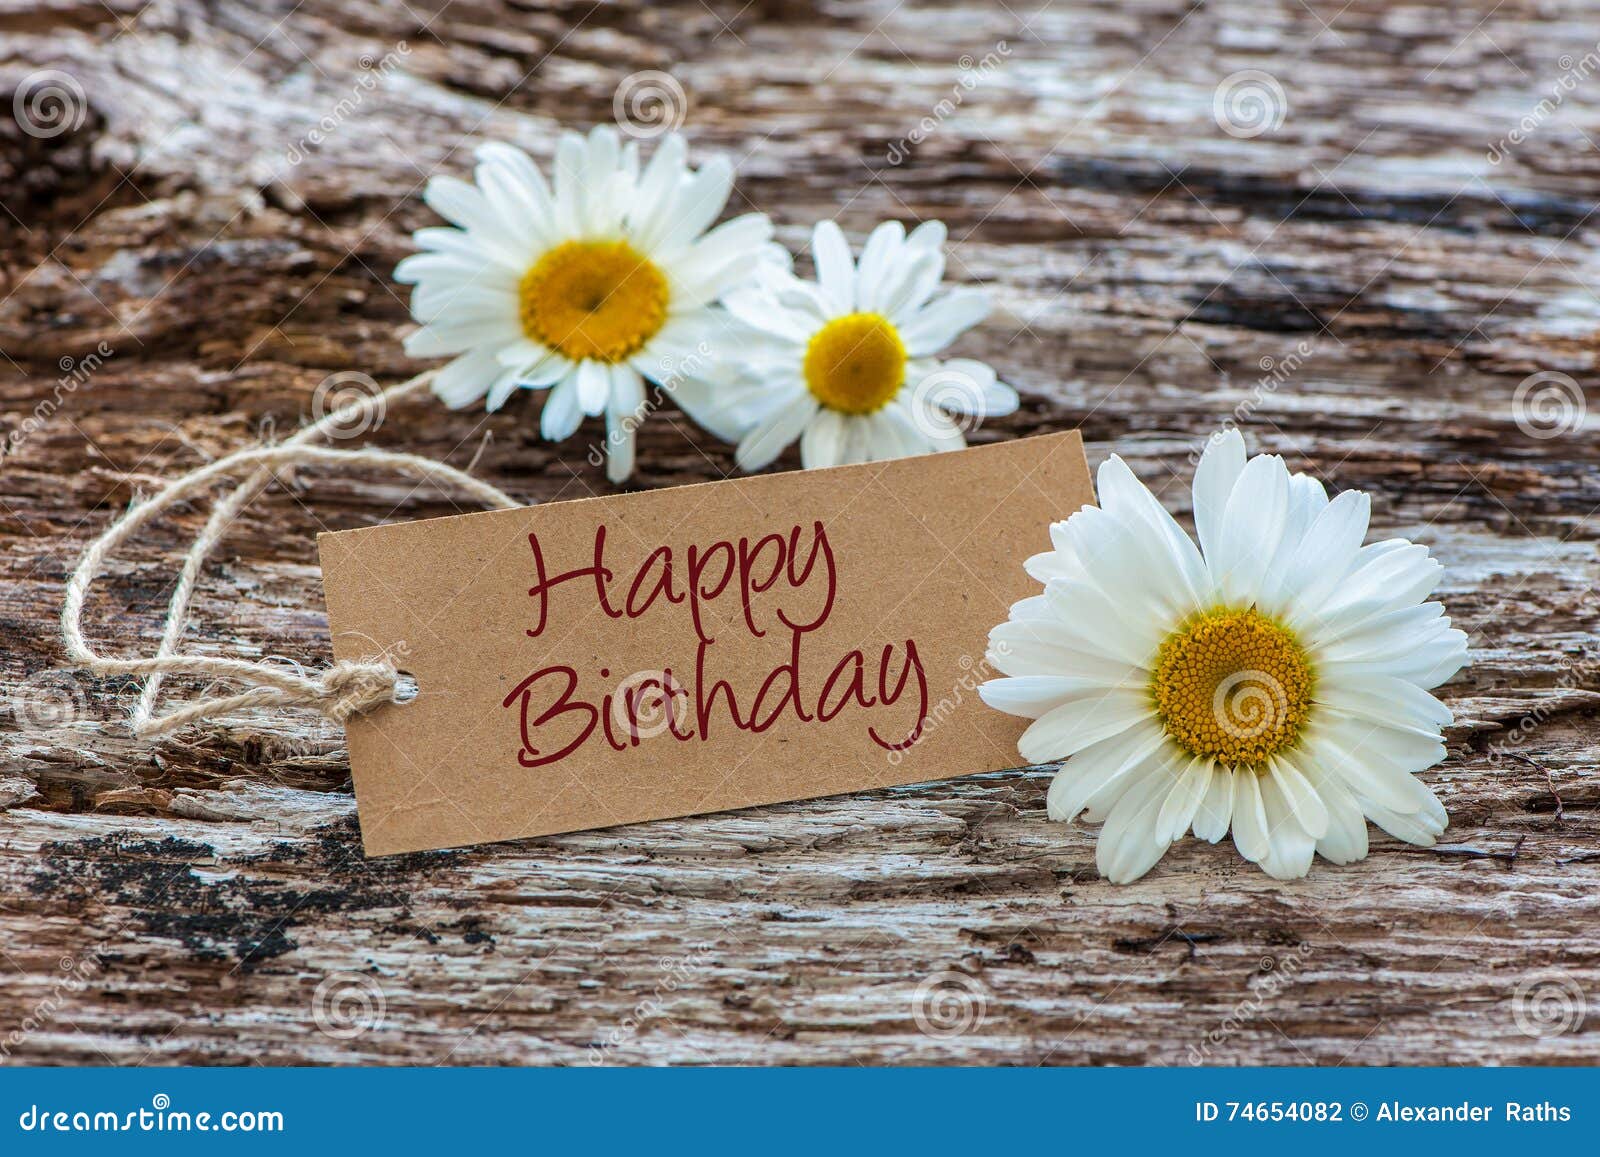 https://thumbs.dreamstime.com/z/happy-birthday-daisy-flowers-tag-wooden-background-74654082.jpg